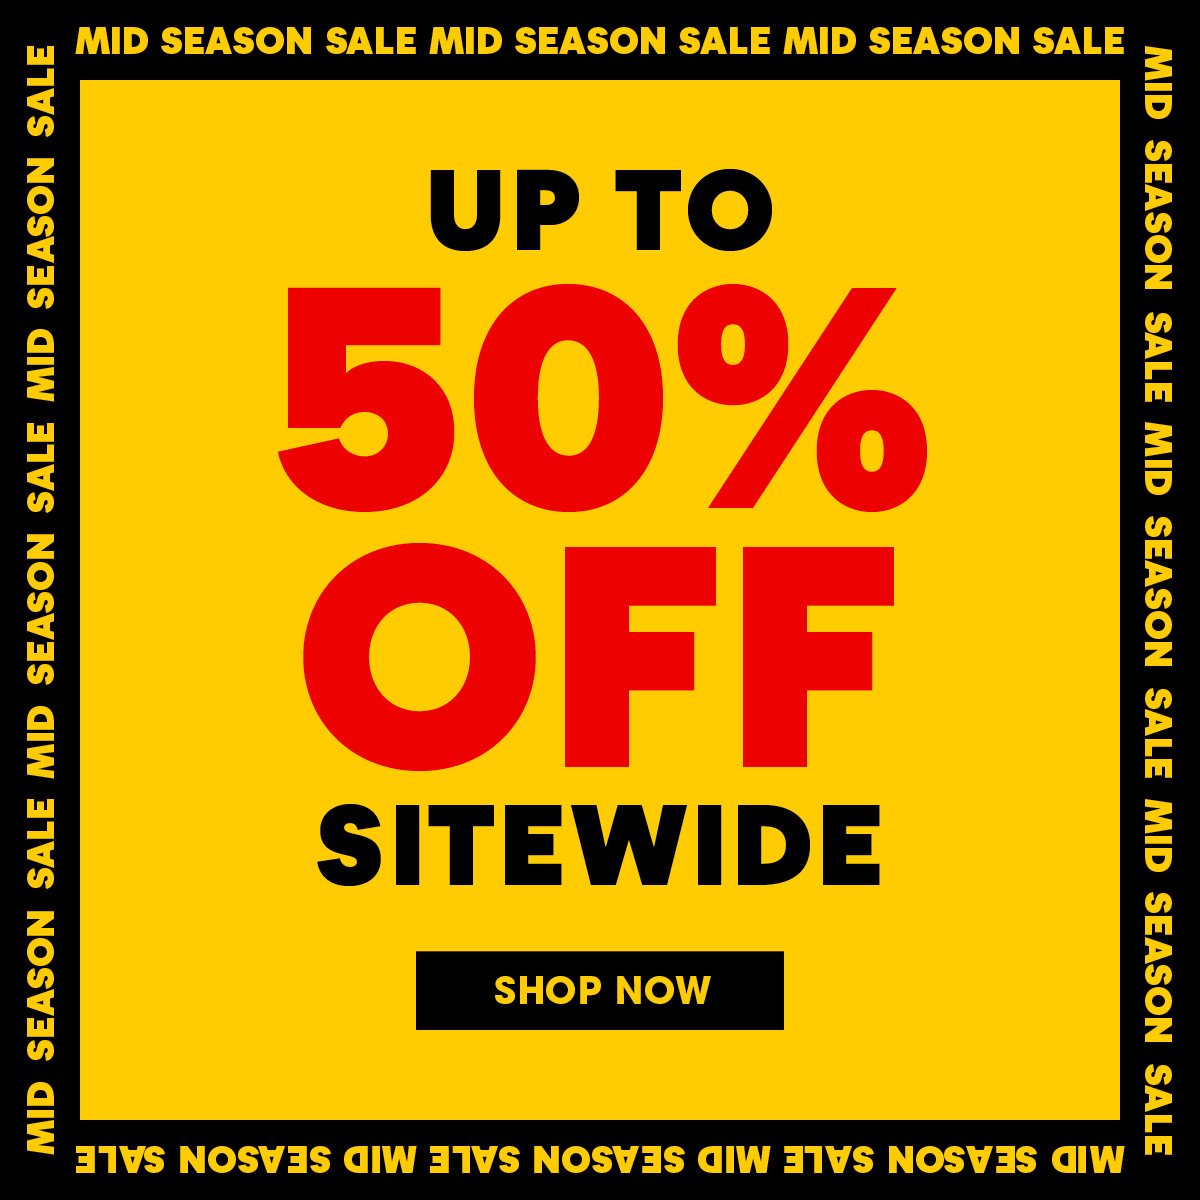 MID SEASON SALE UP TO 50% OFF STOREWIDE